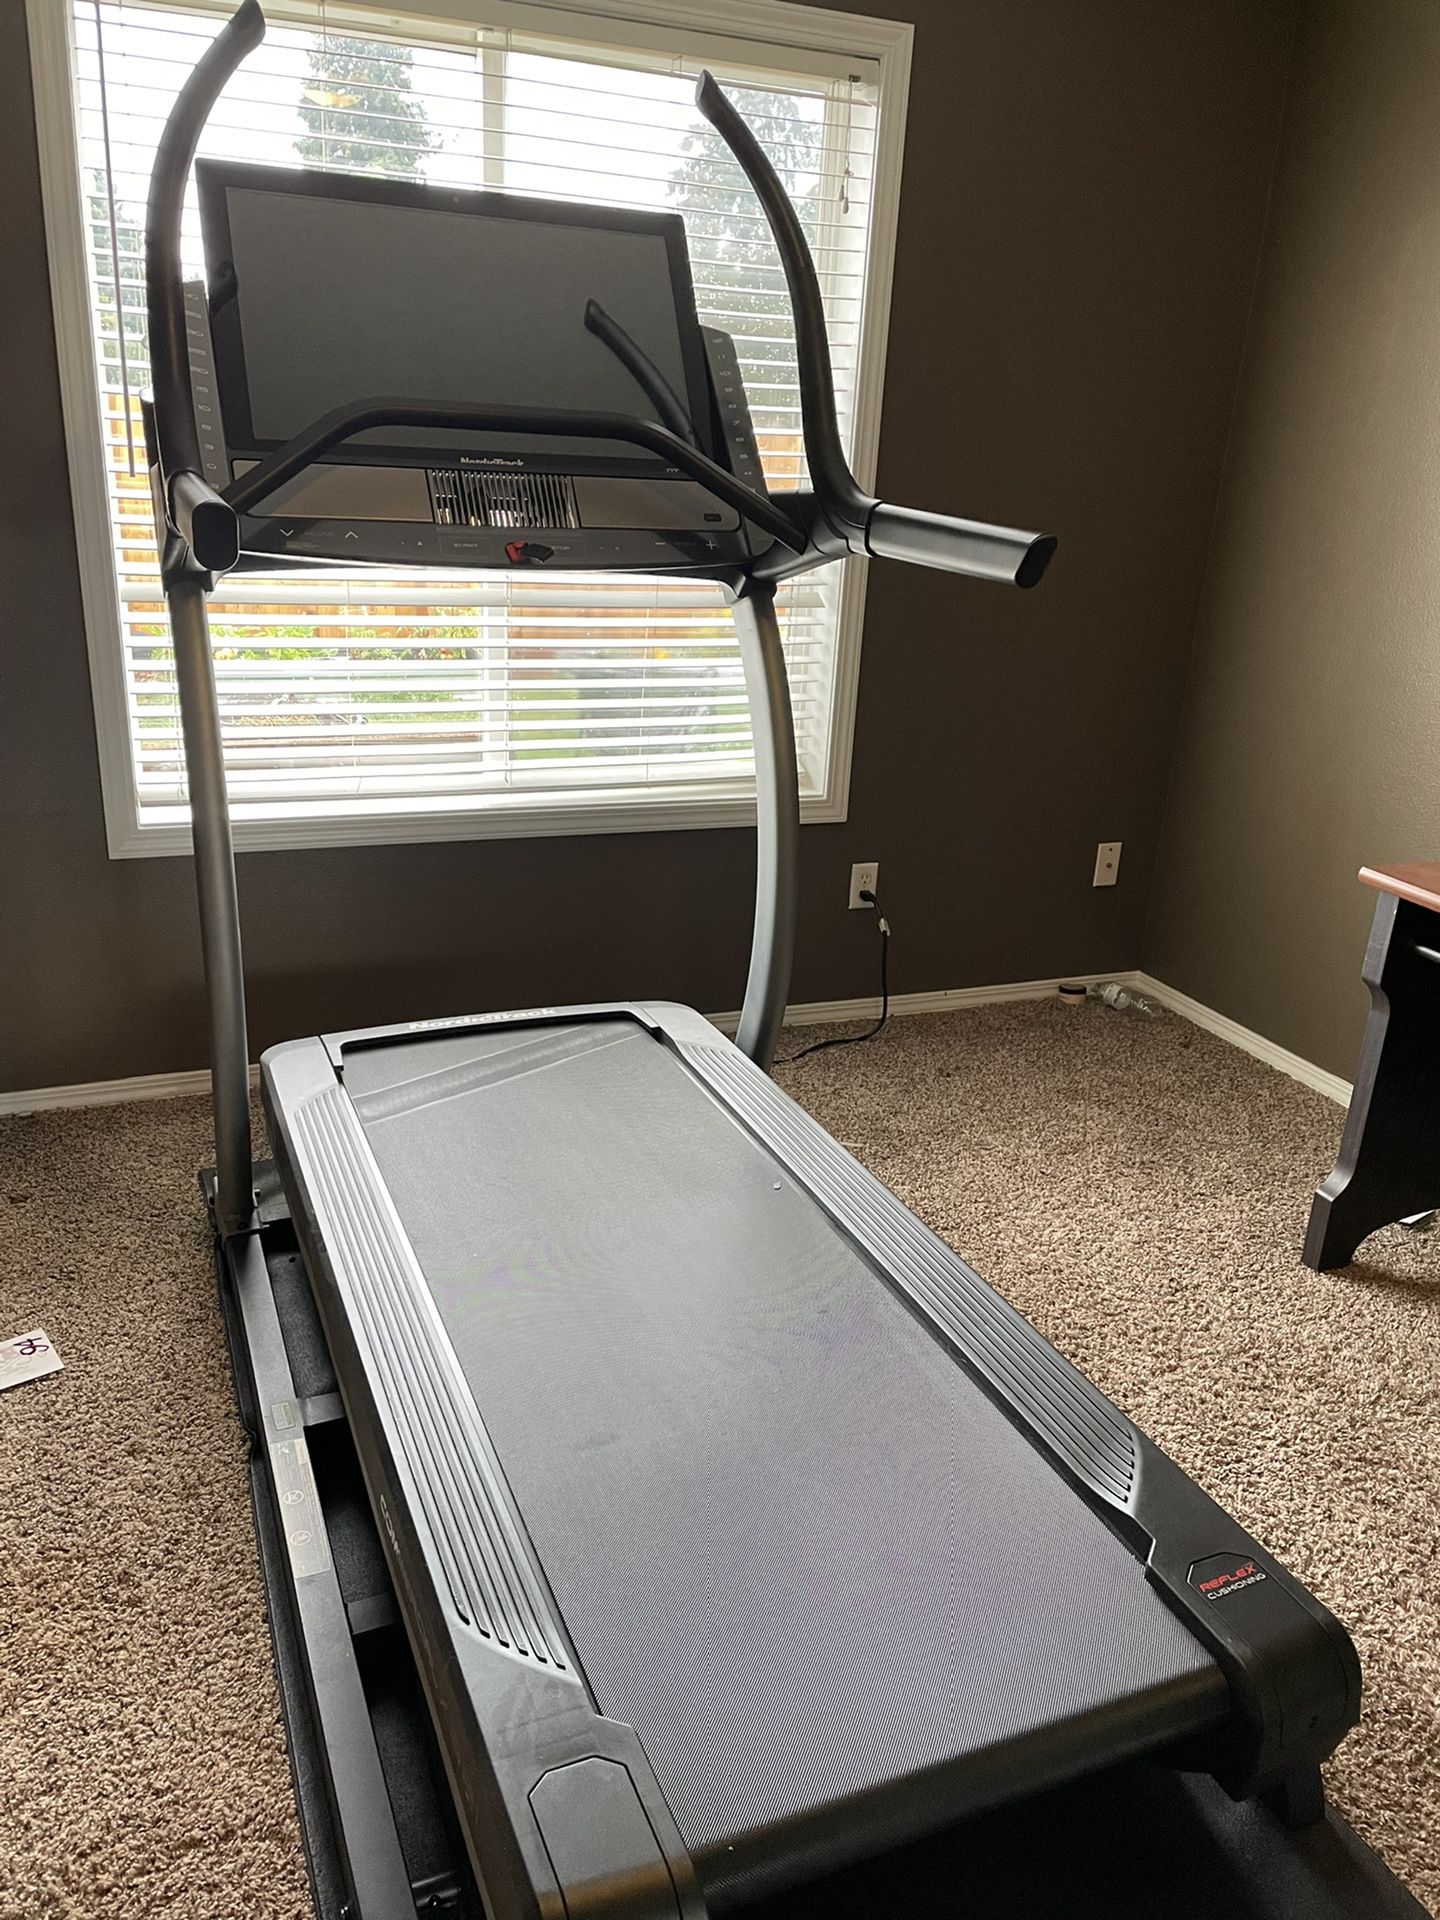 Nordic Track Treadmill 6 Months Old With Ifit 